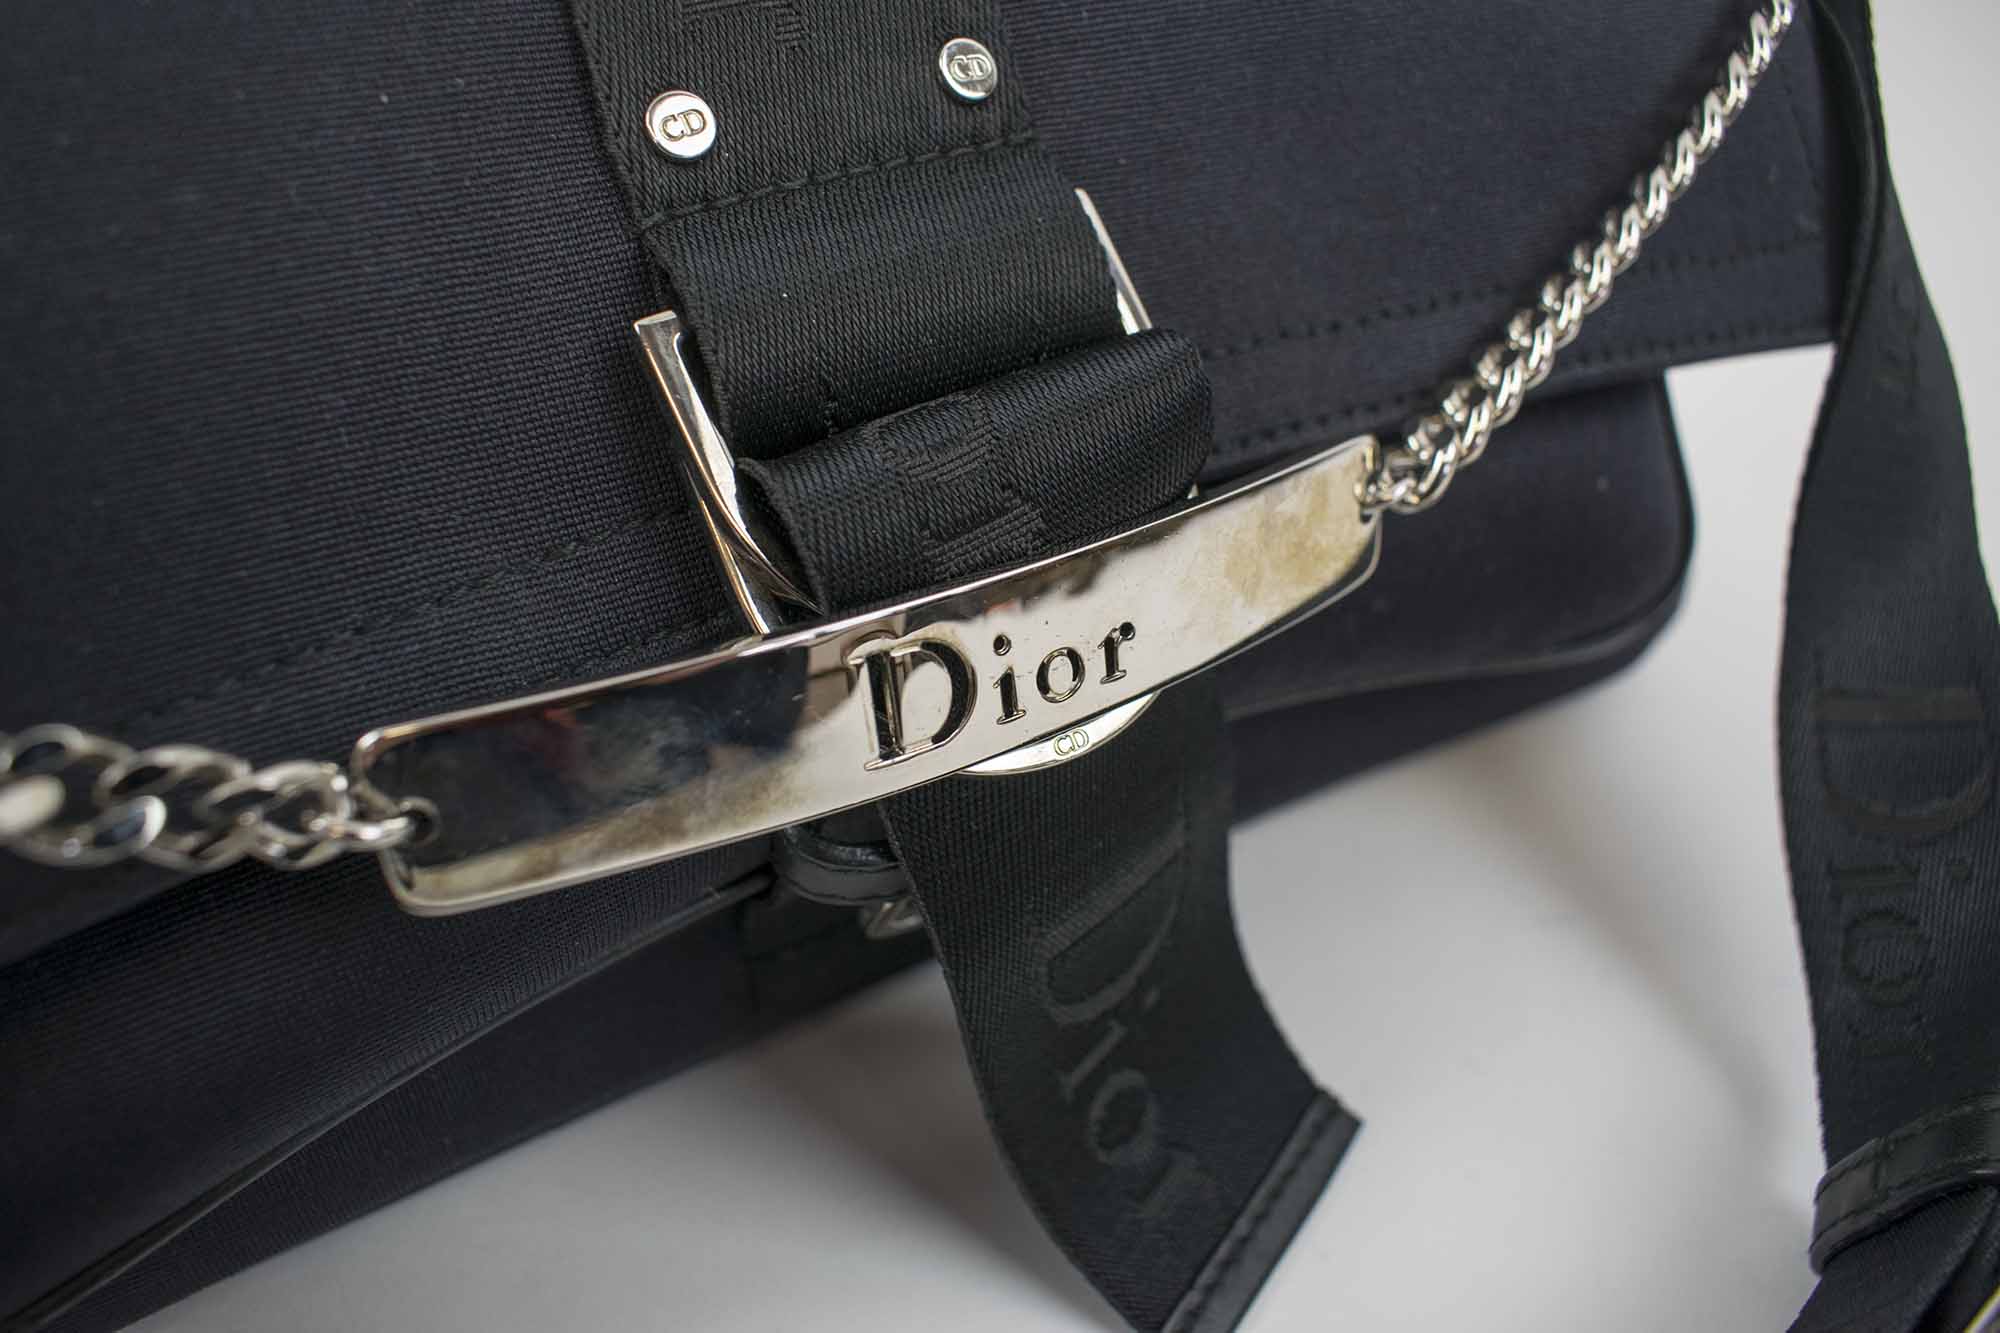 CHRISTIAN DIOR SATIN BAG, black satin with logo on the strap and front,  monogram fabric lining, removable rhinestone clasp and silver link chain,  bottom feet, 31cm x 15cm H x 8cm.